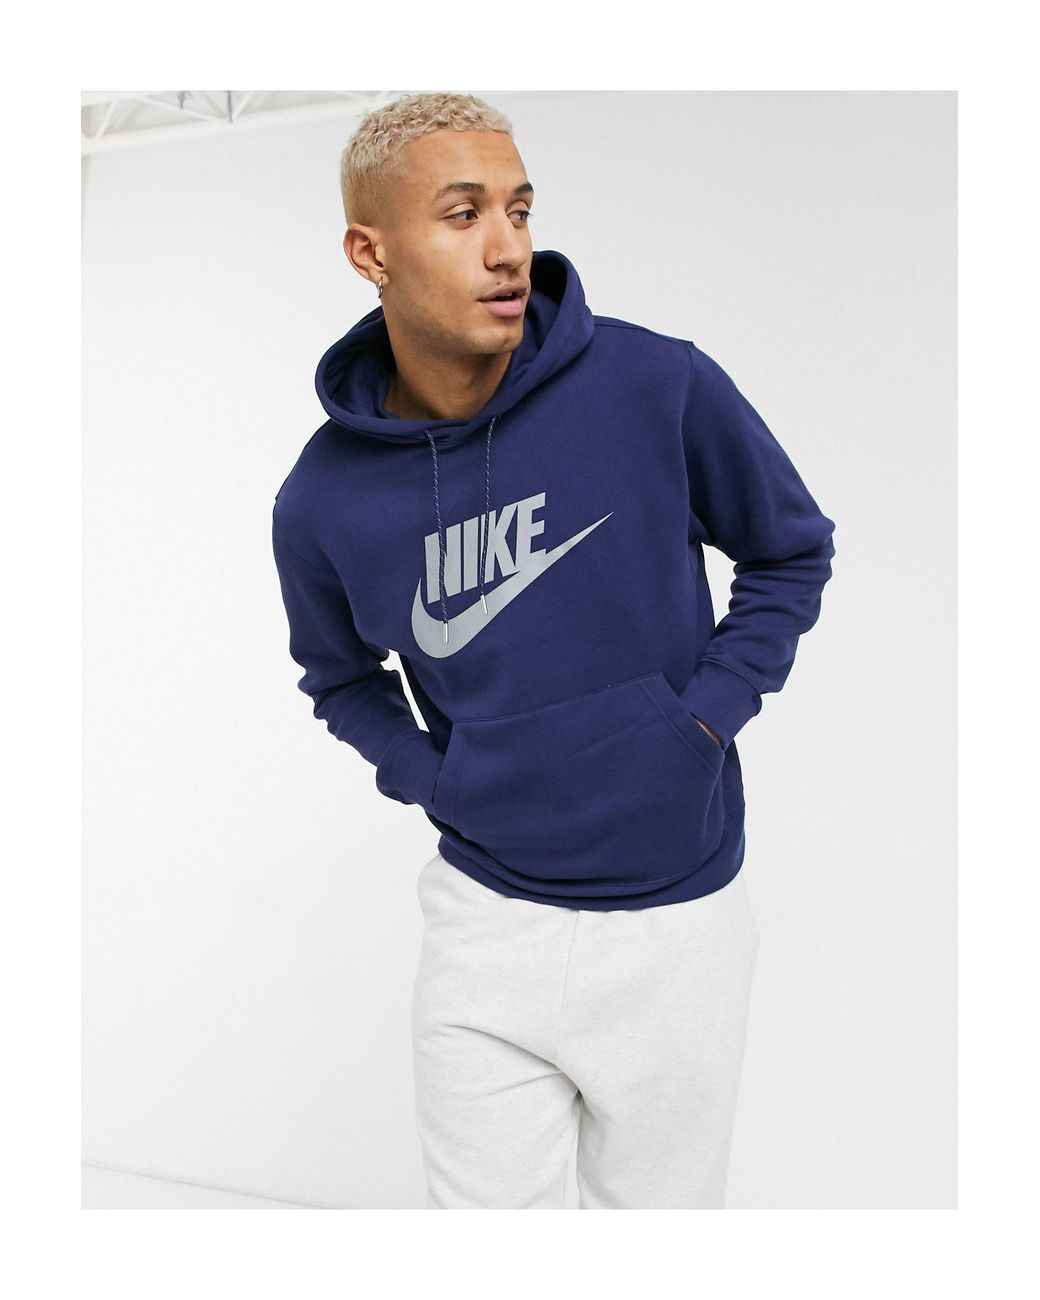 Nike Club Reflective Logo Hoodie in Navy (Blue) for Men - Lyst